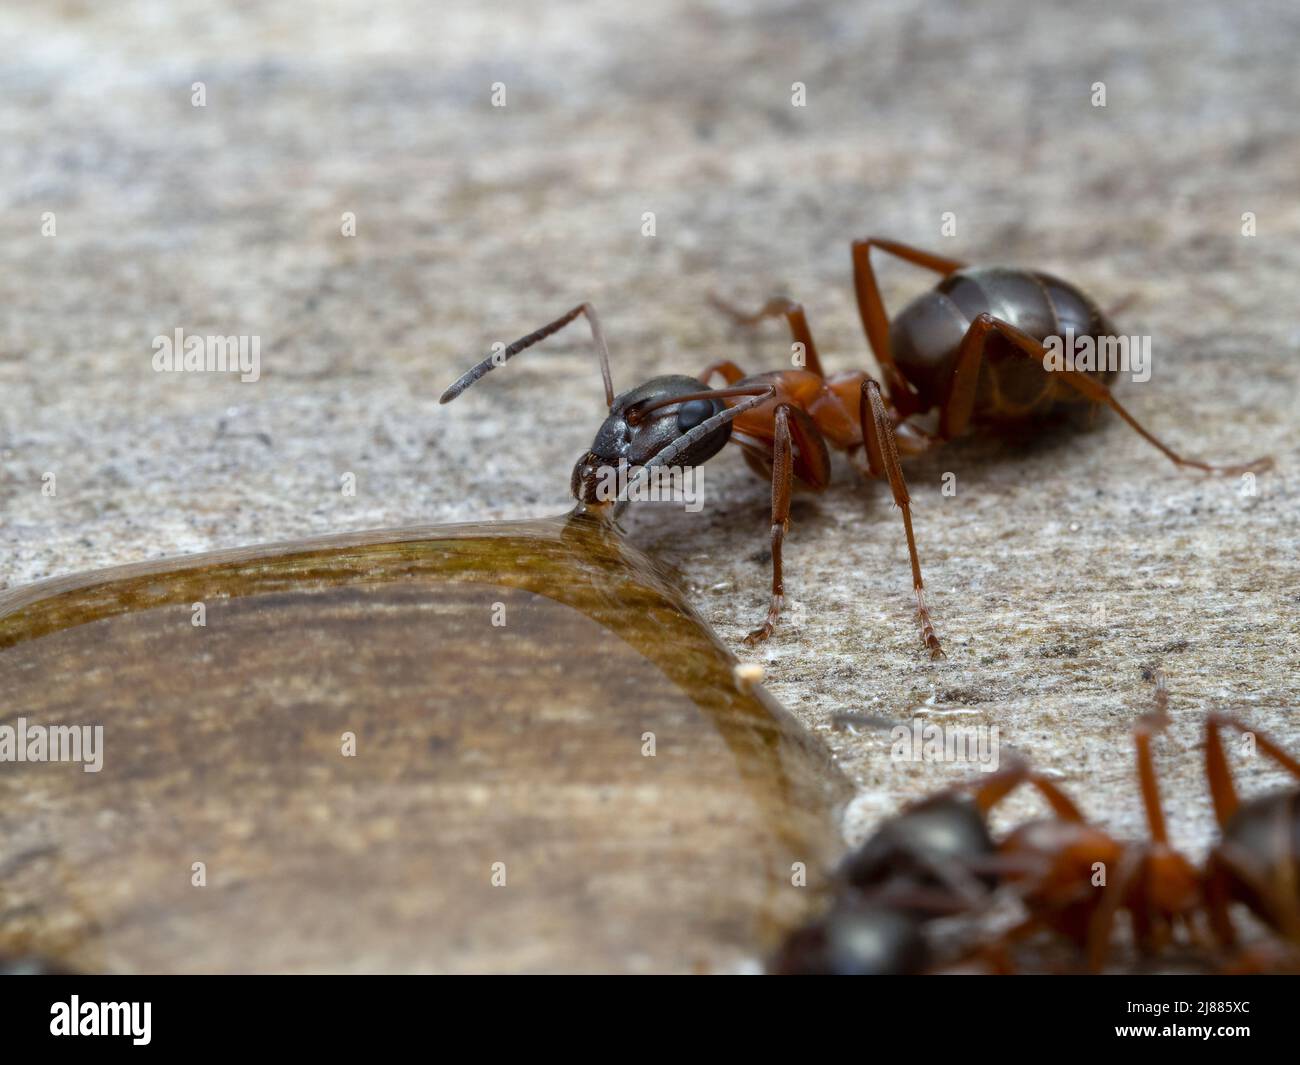 close-up of a pretty red and black carpenter ant, Camponotus vicinus, drinking from a drop of honey Stock Photo